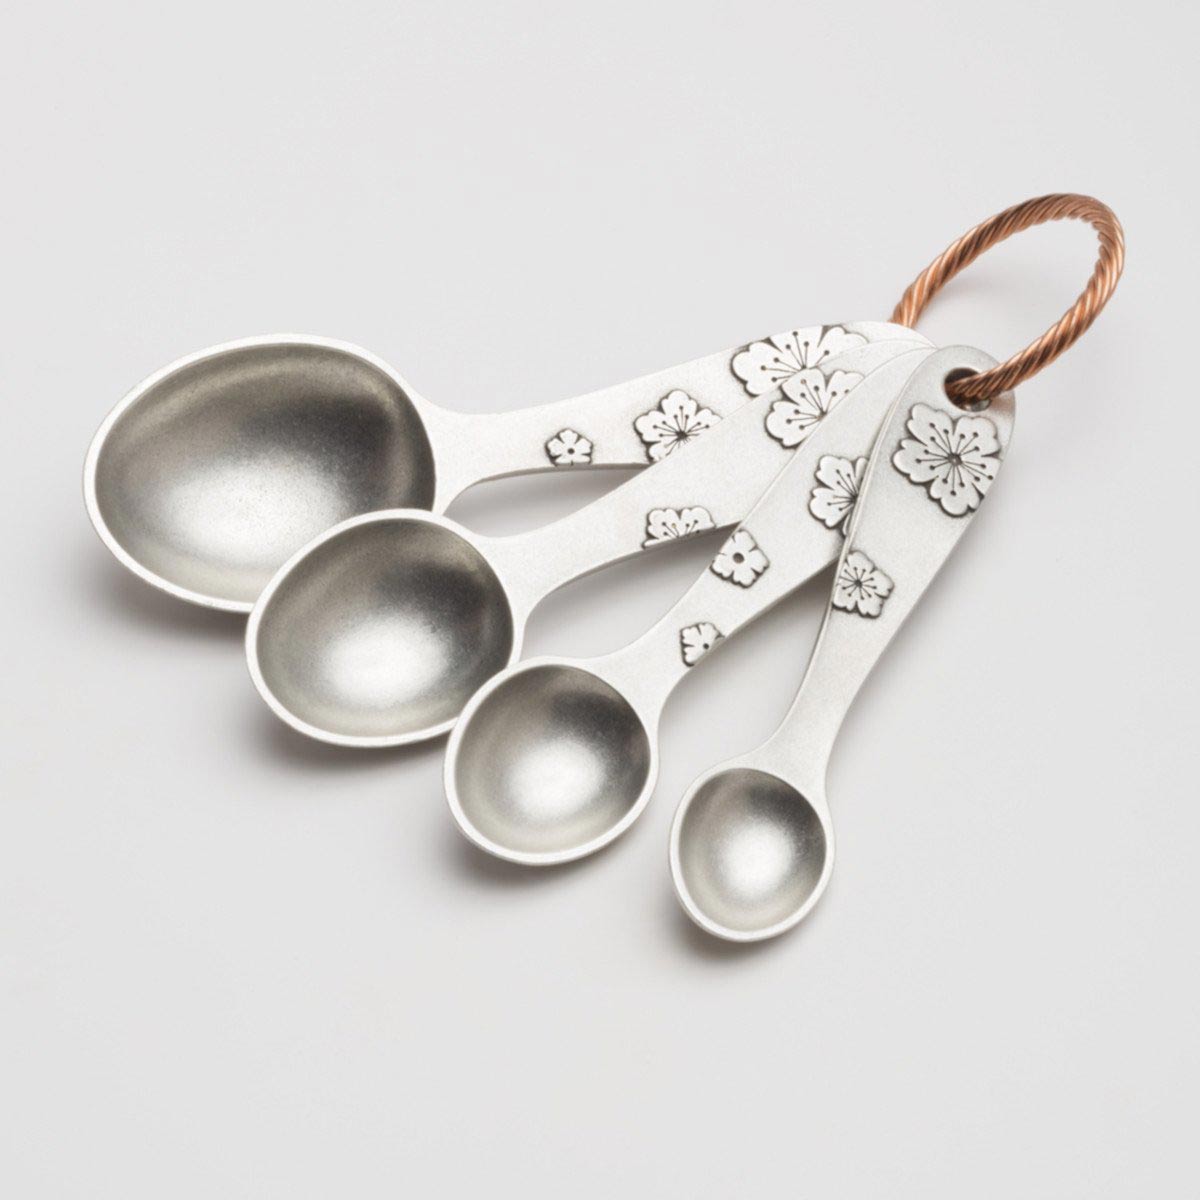 Adjustable Measuring Spoon (2 Spoons Included) – Home Saver